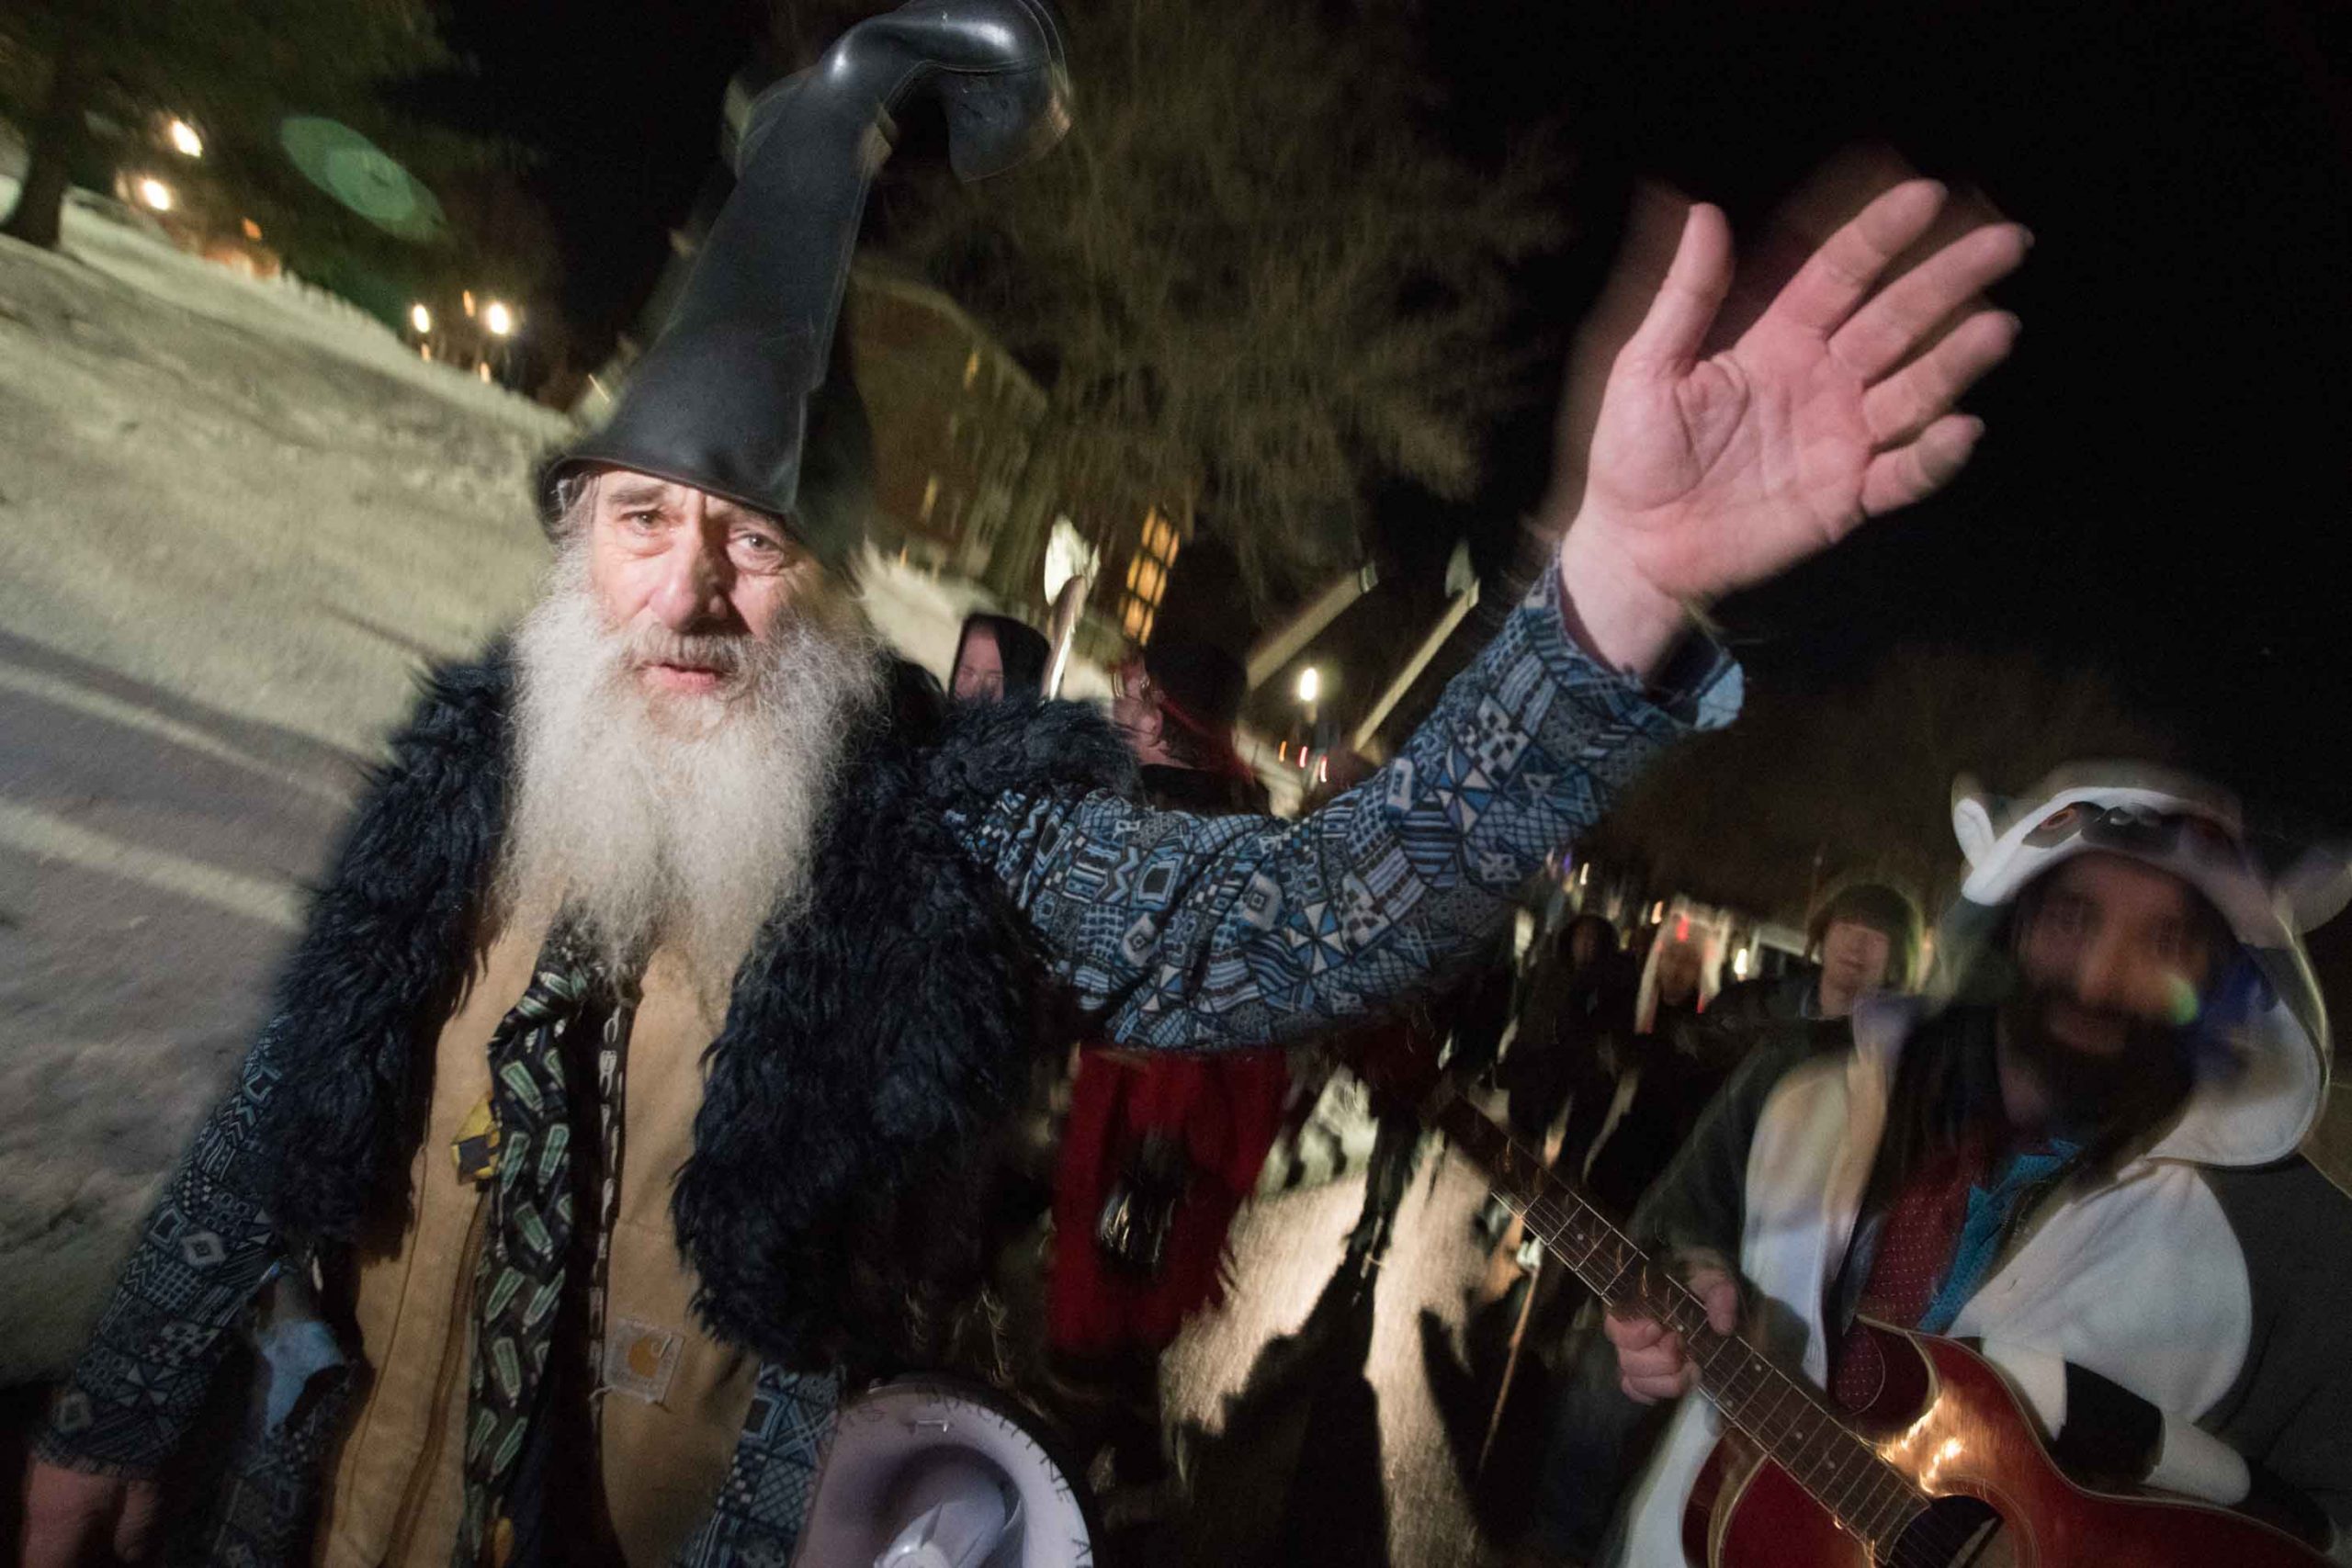 PHOTO GALLERY: VERMIN SUPREME'S BIRD-DOG AND PONY SHOW OUTSIDE THE SAINT ANSELM DEBATE